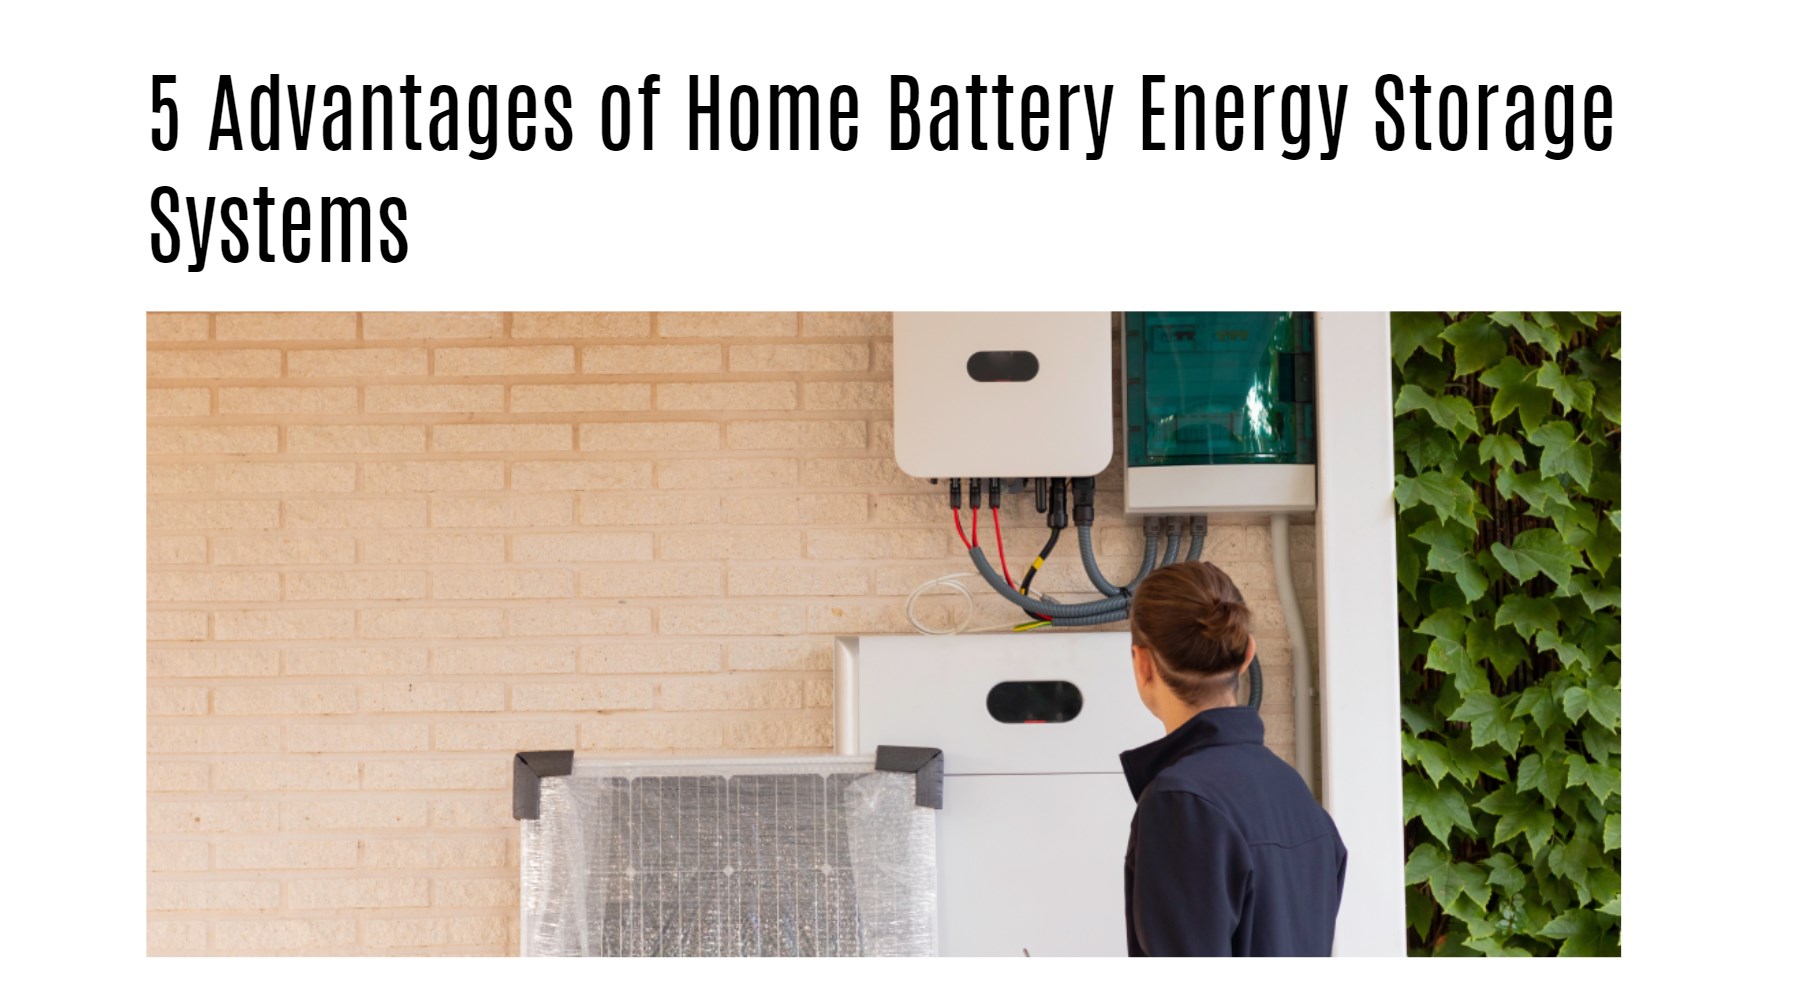 5 Advantages of Home Battery Energy Storage Systems